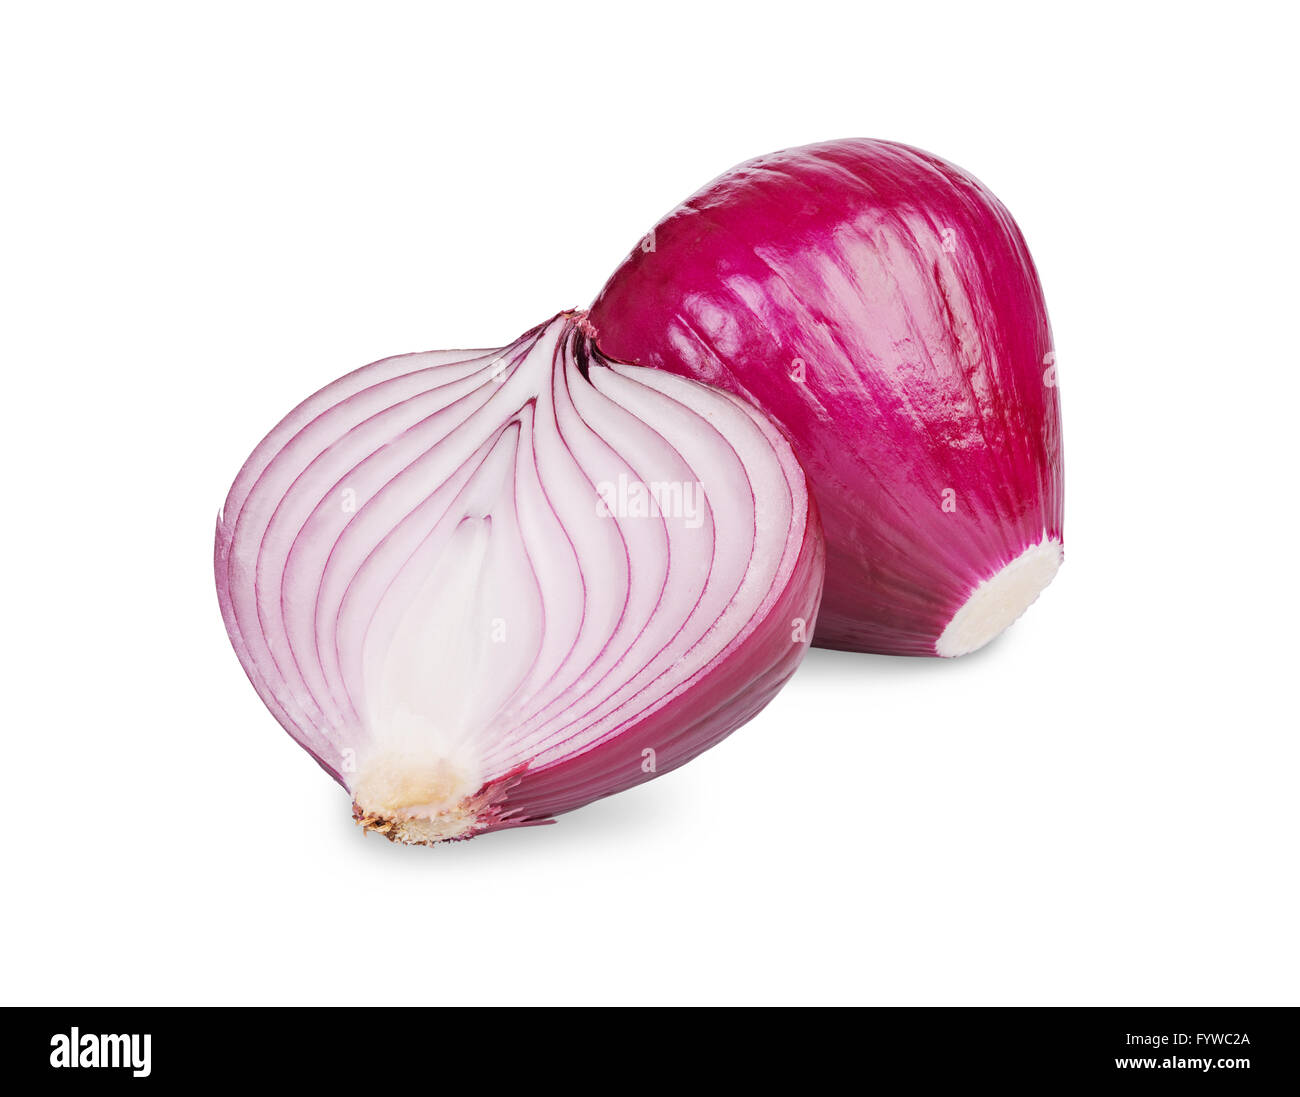 red onion full and sliced  isolated on white background Stock Photo